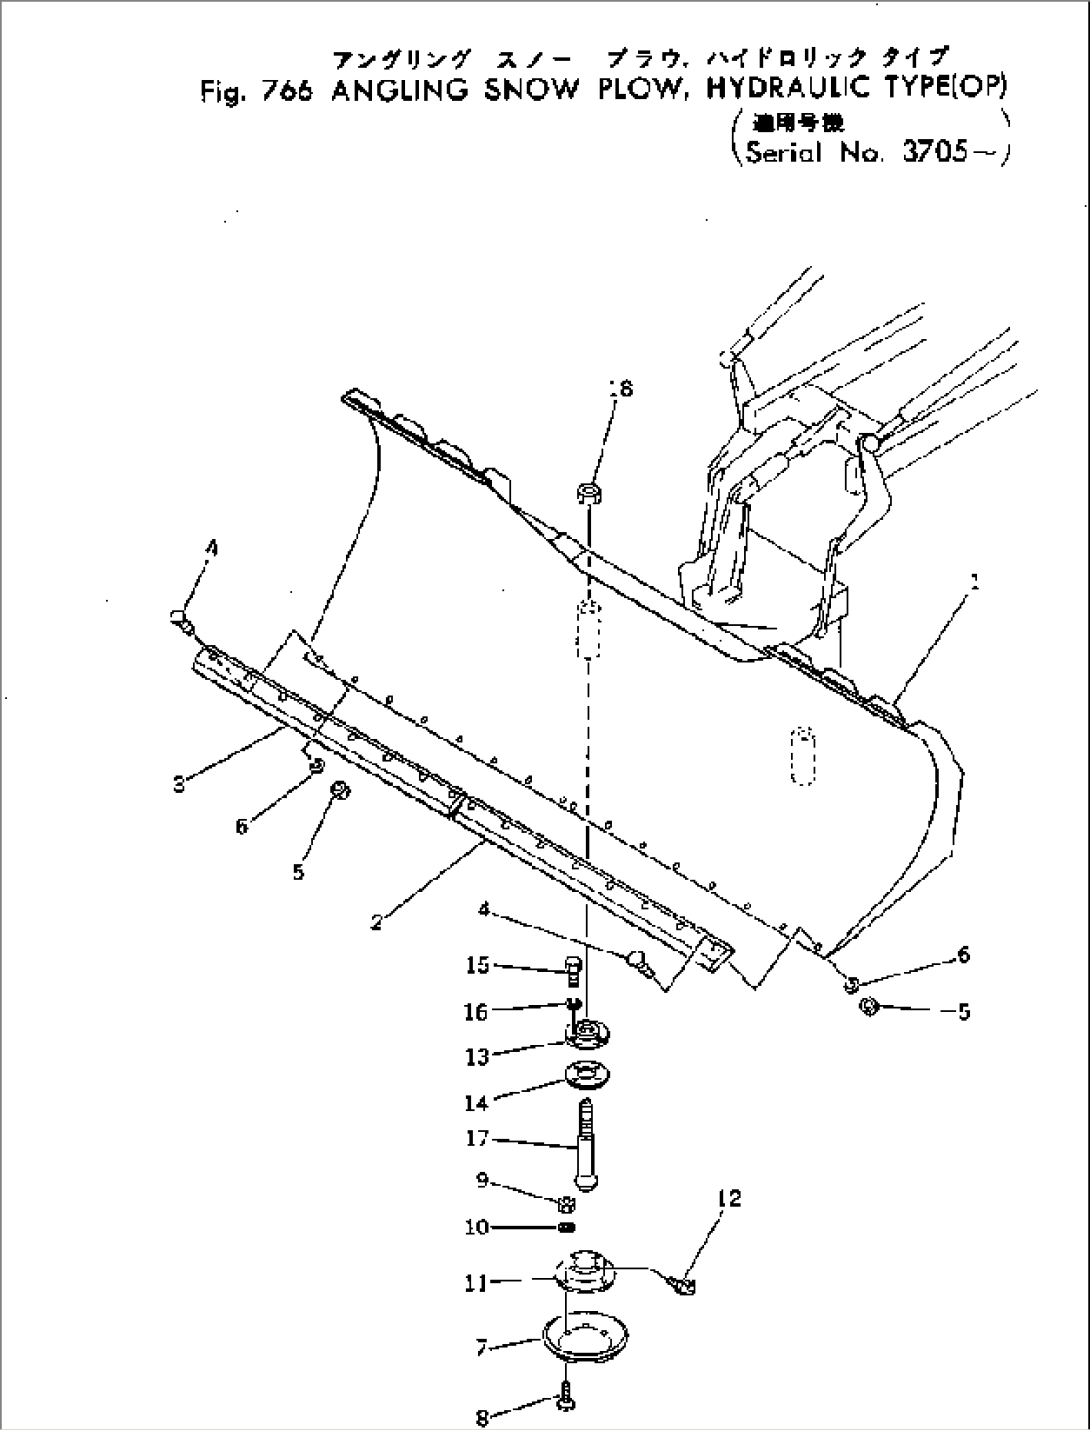 ANGLING SNOW PLOW (OP) (HYDRAULIC TYPE)(#3705-)